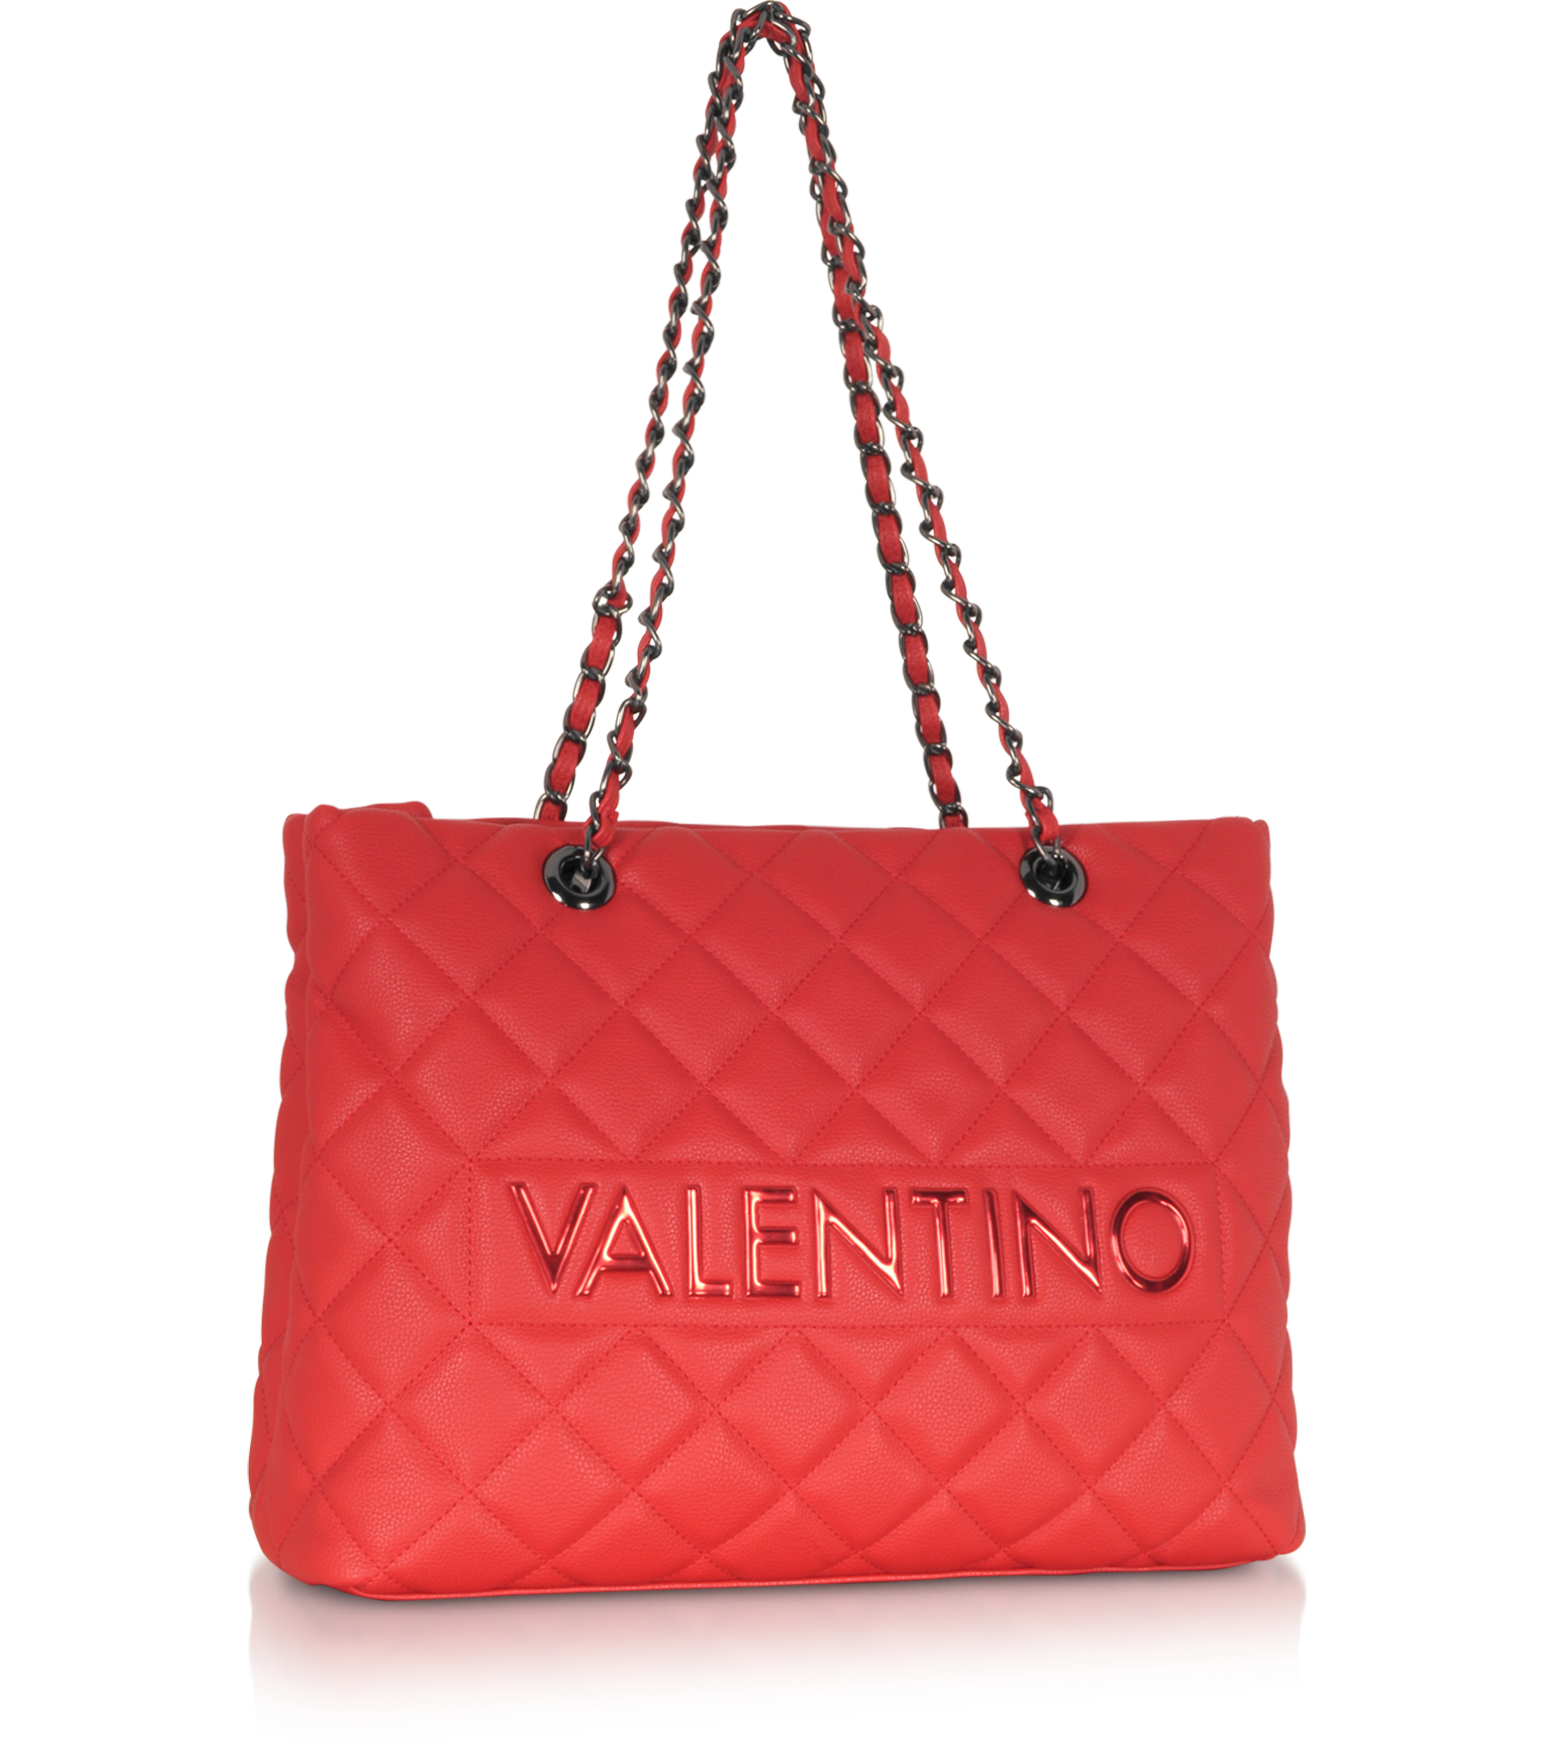 Valentino Black and Red VRing Shoulder Bag at FORZIERI